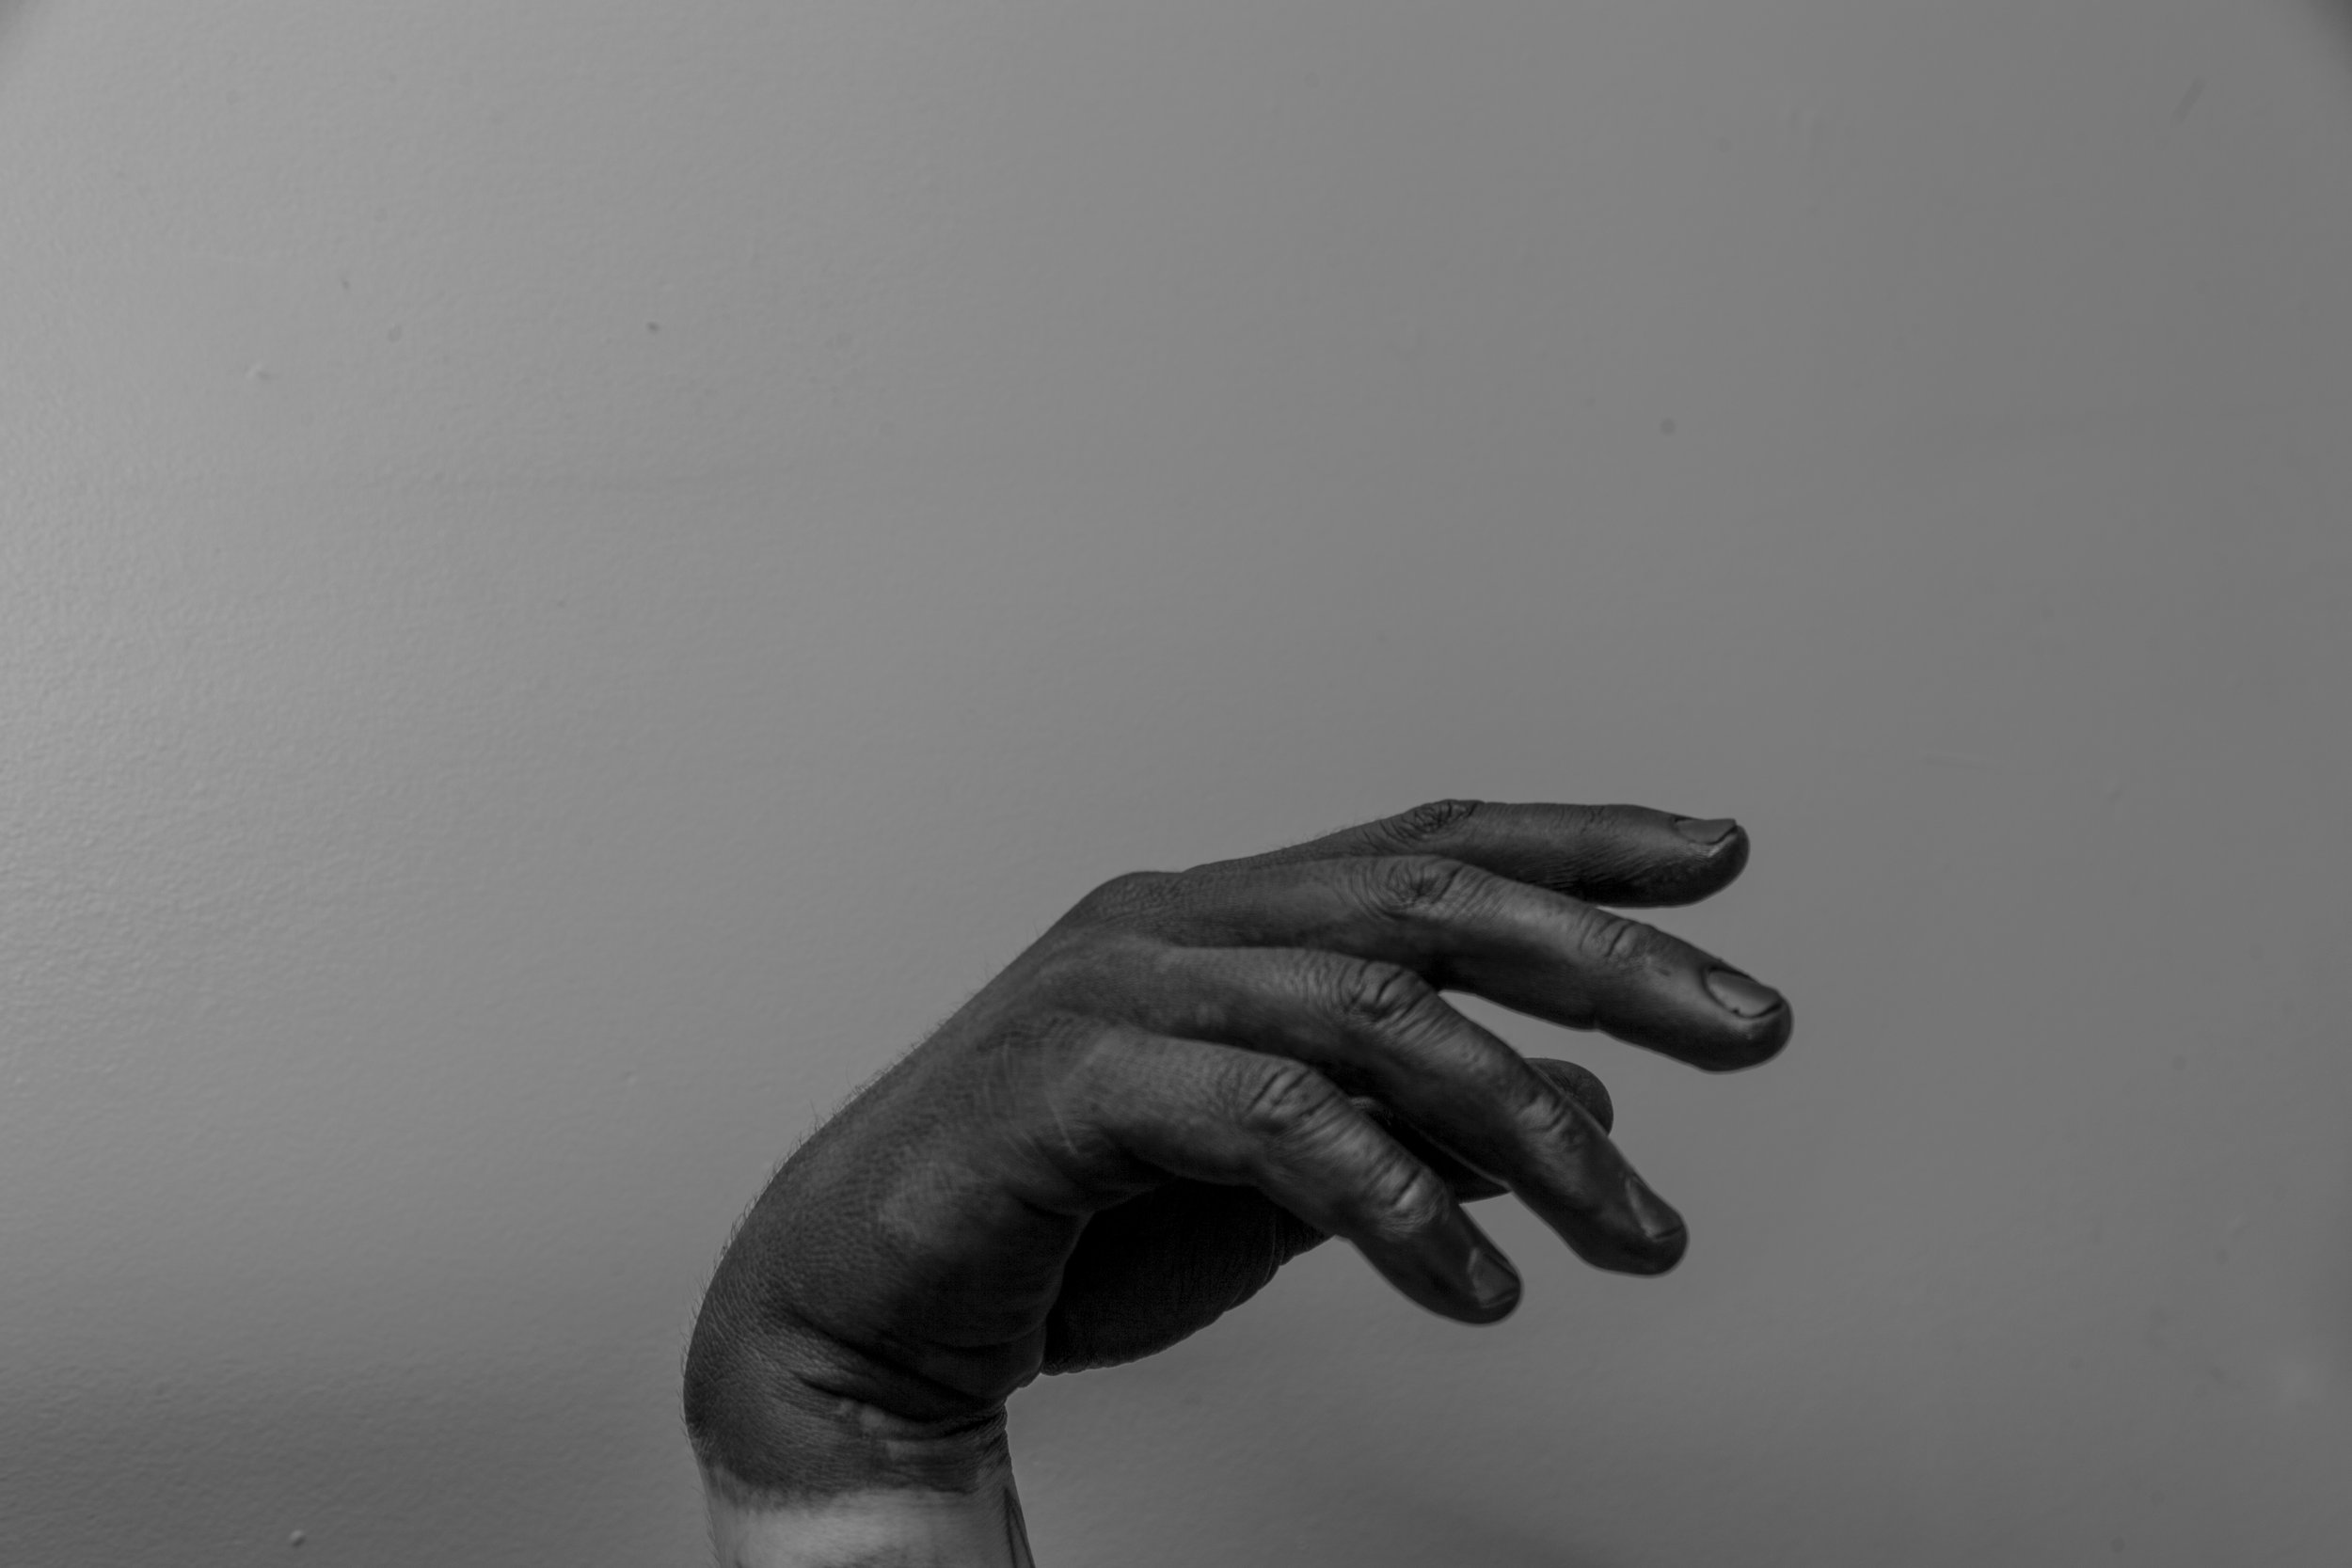 A photo of a hand